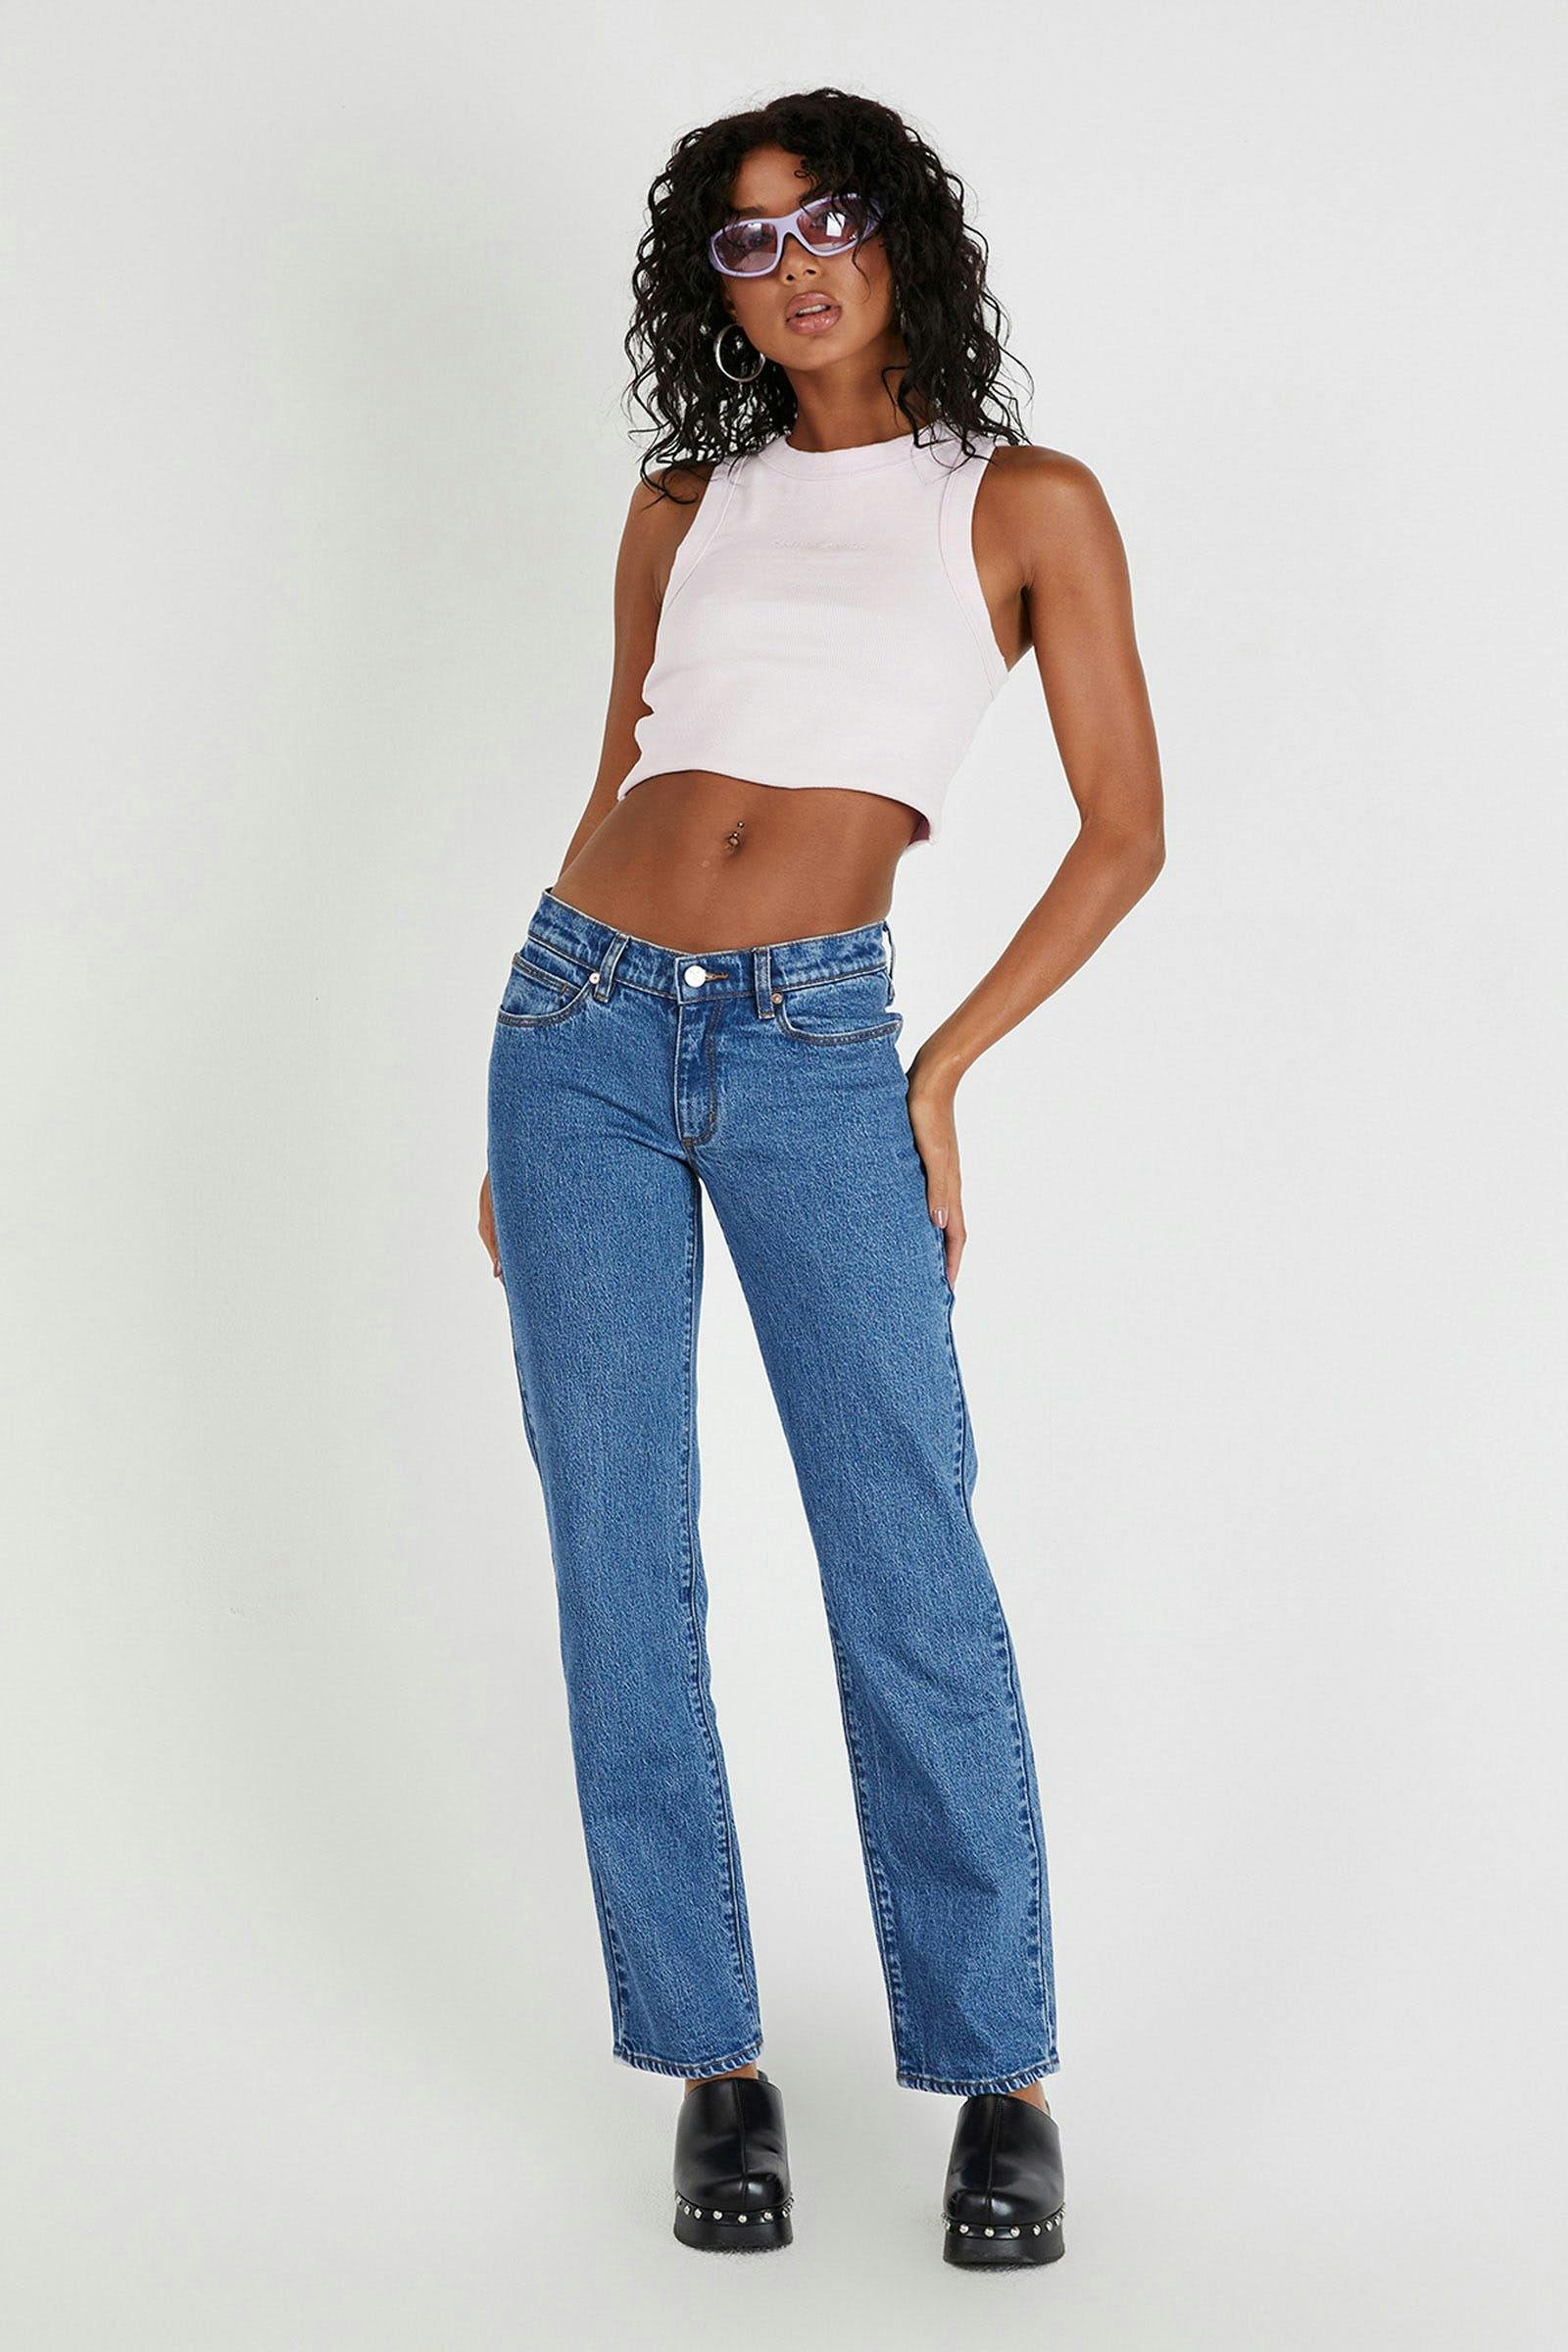 Women's Denim Fit Guide | Abrand Jeans